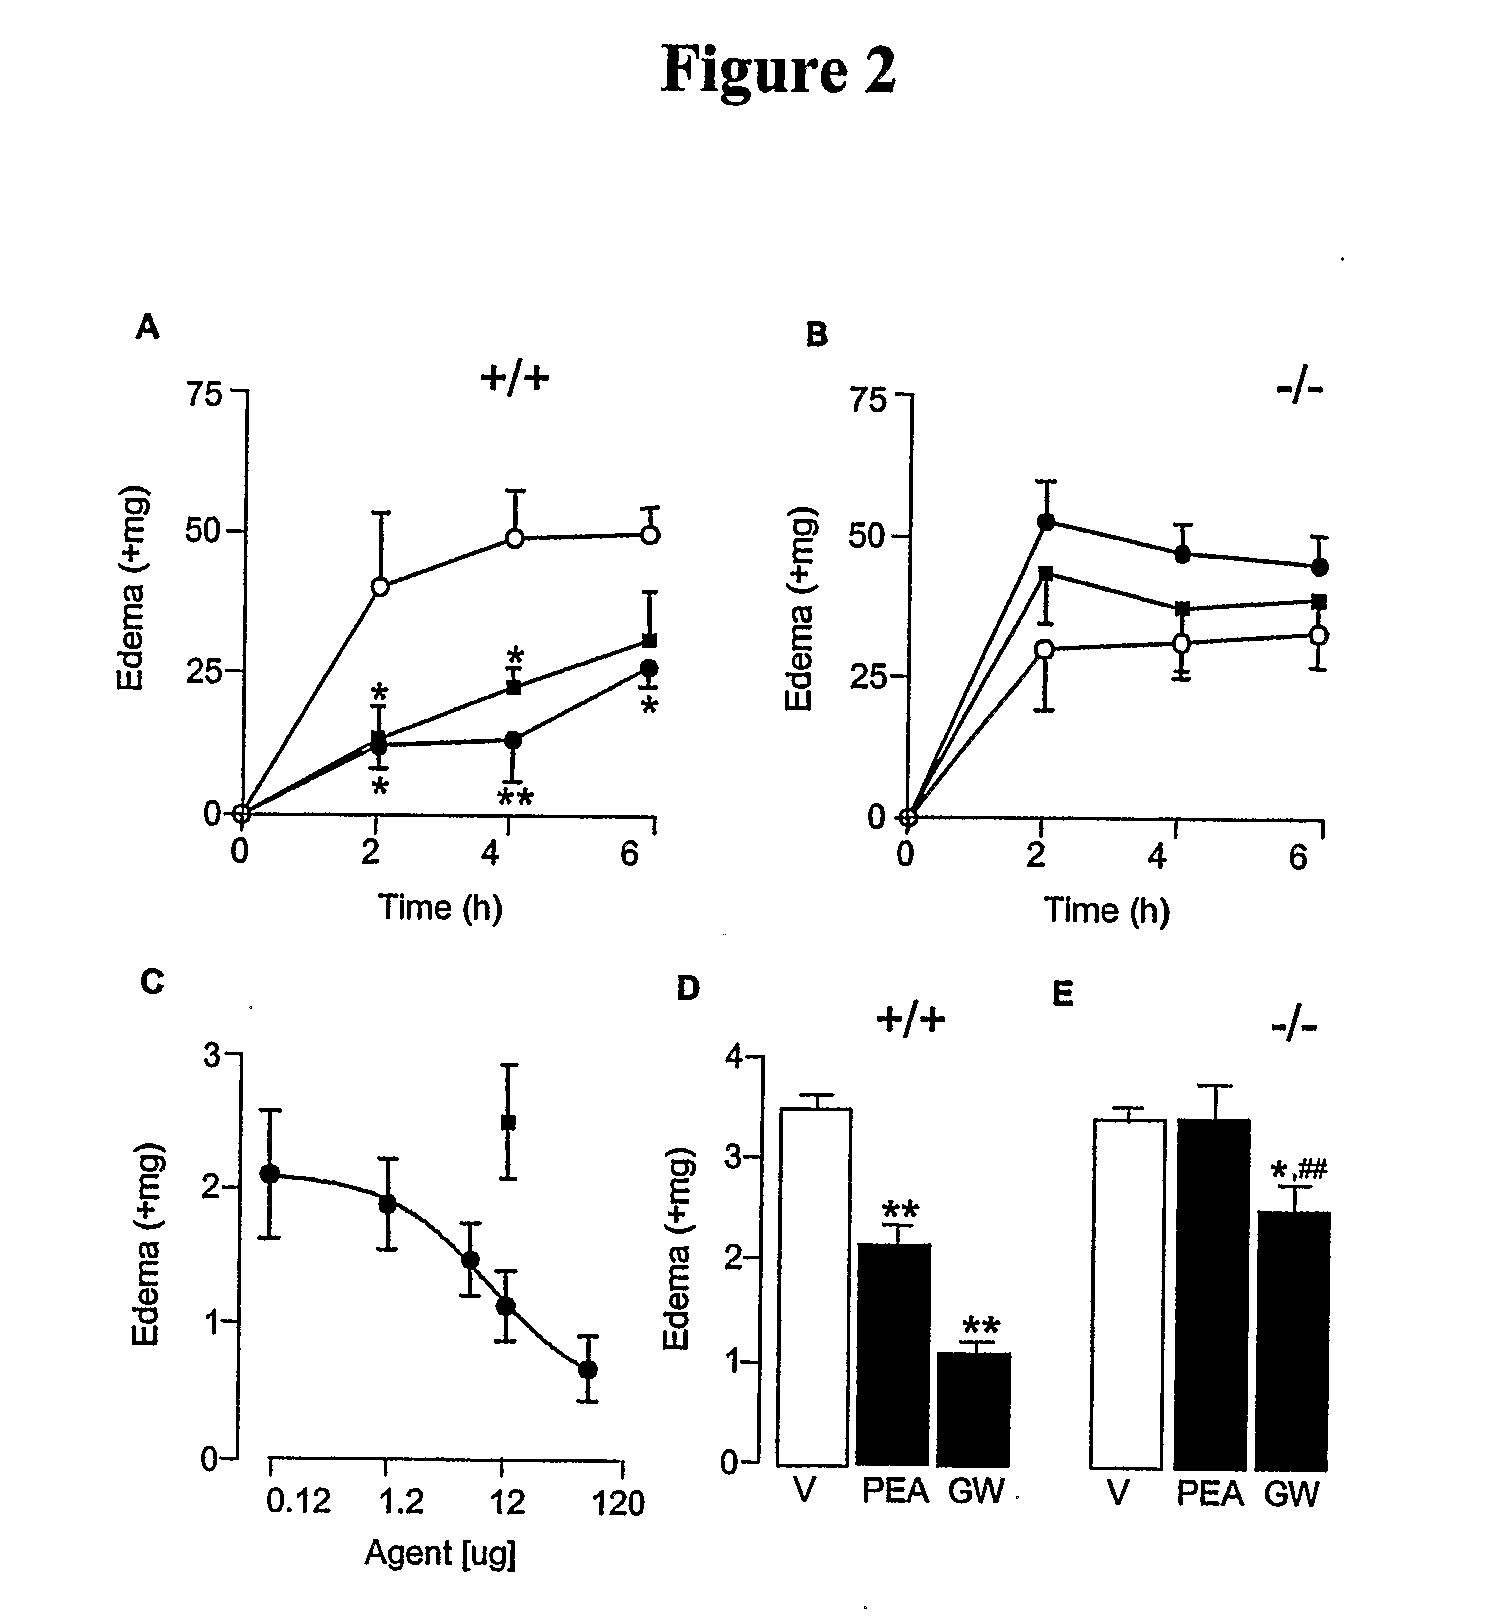 Compounds And Methods For Treating Non-Inflammatory Pain Using Ppar Alpha Agonists